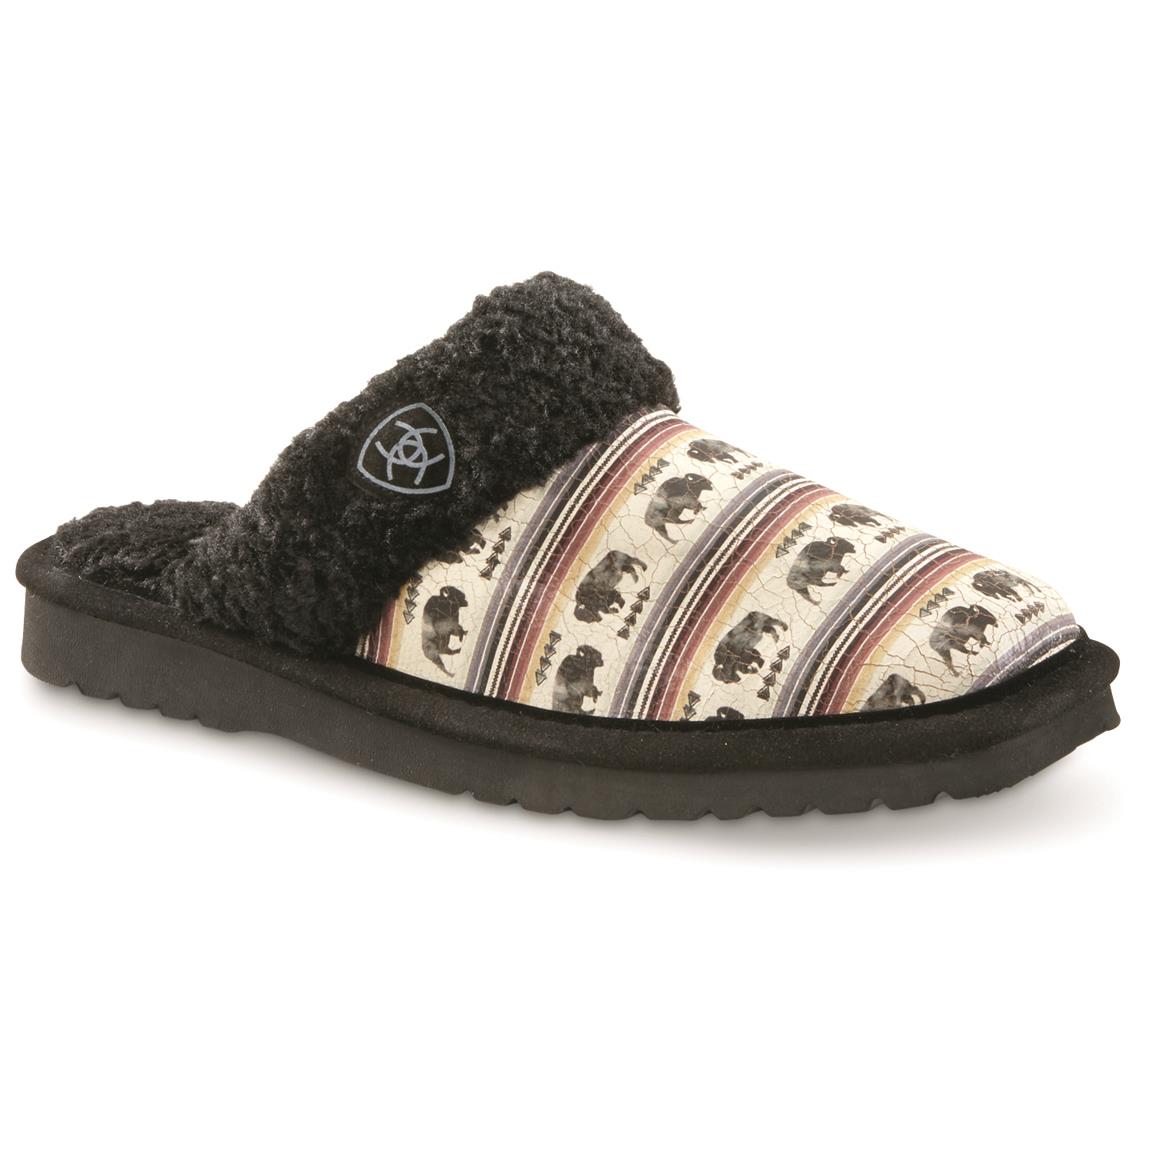 Ariat Women's Jackie Exotic Square Toe Slippers, Buffalo Print